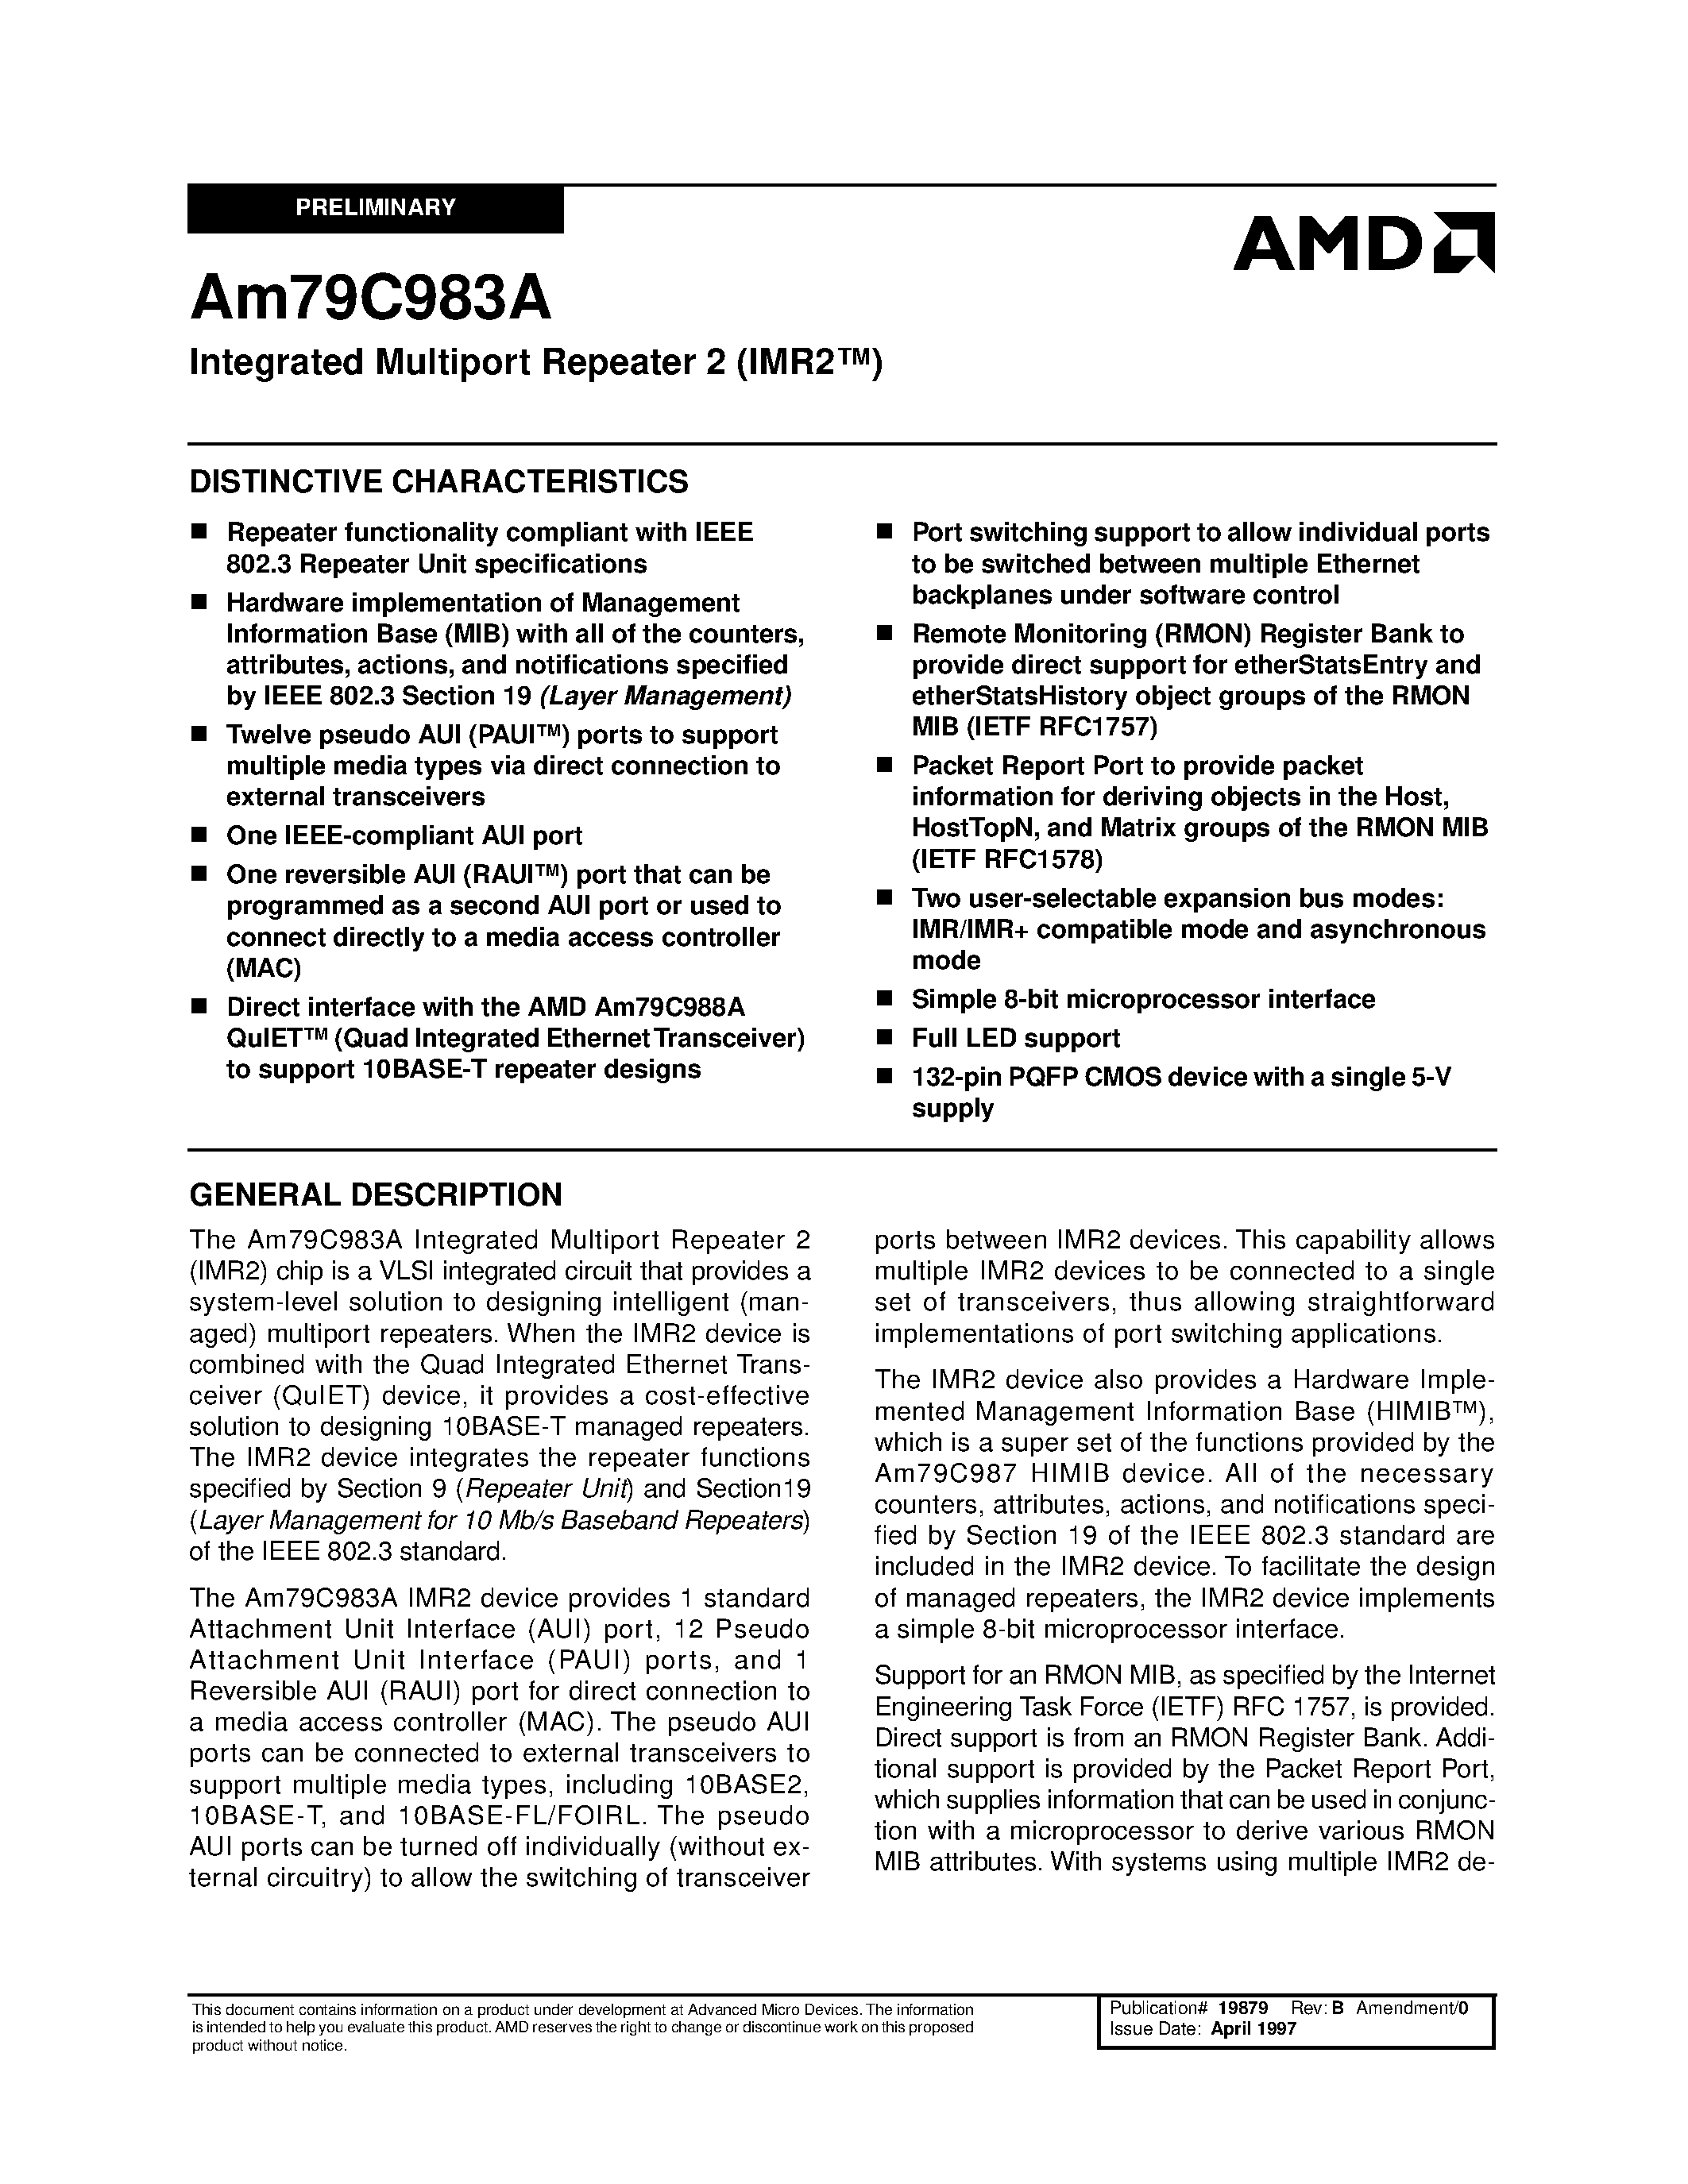 Datasheet Am79C983AKC - Integrated Multiport Repeater 2 (IMR2) page 1